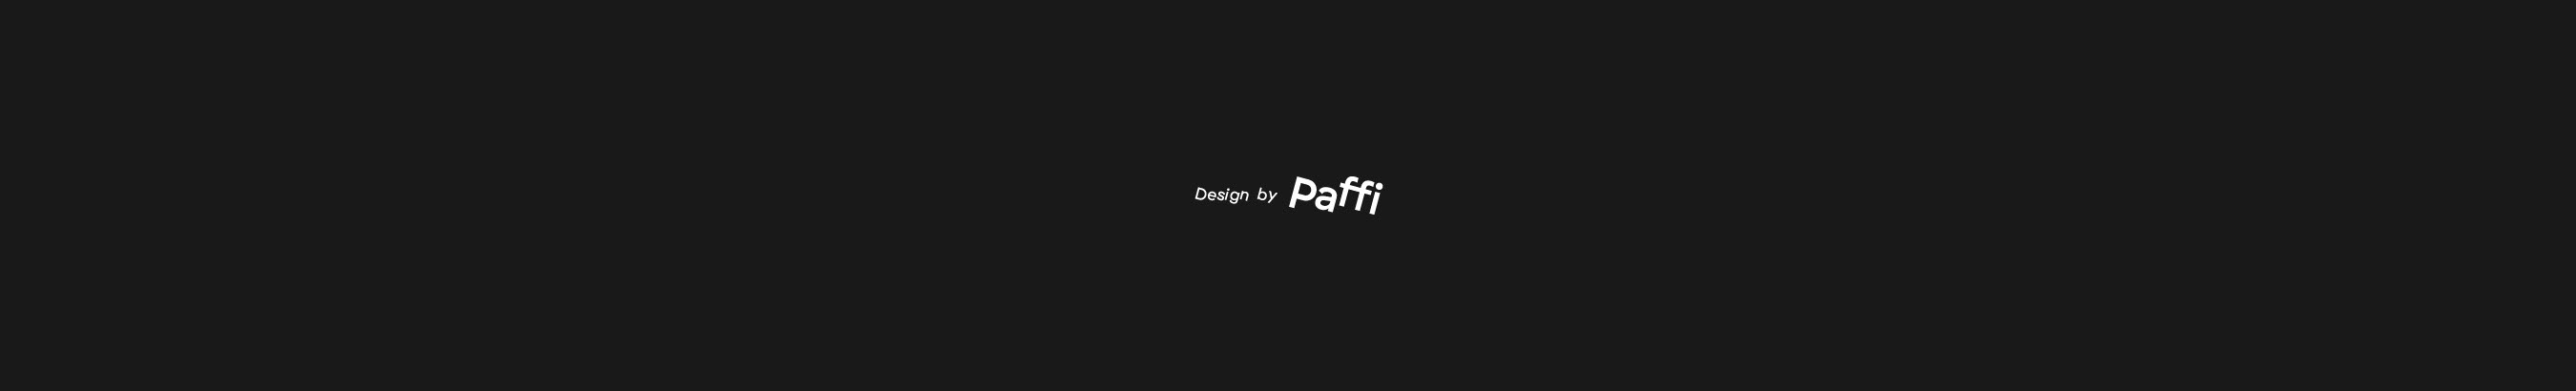 Paffi's profile banner